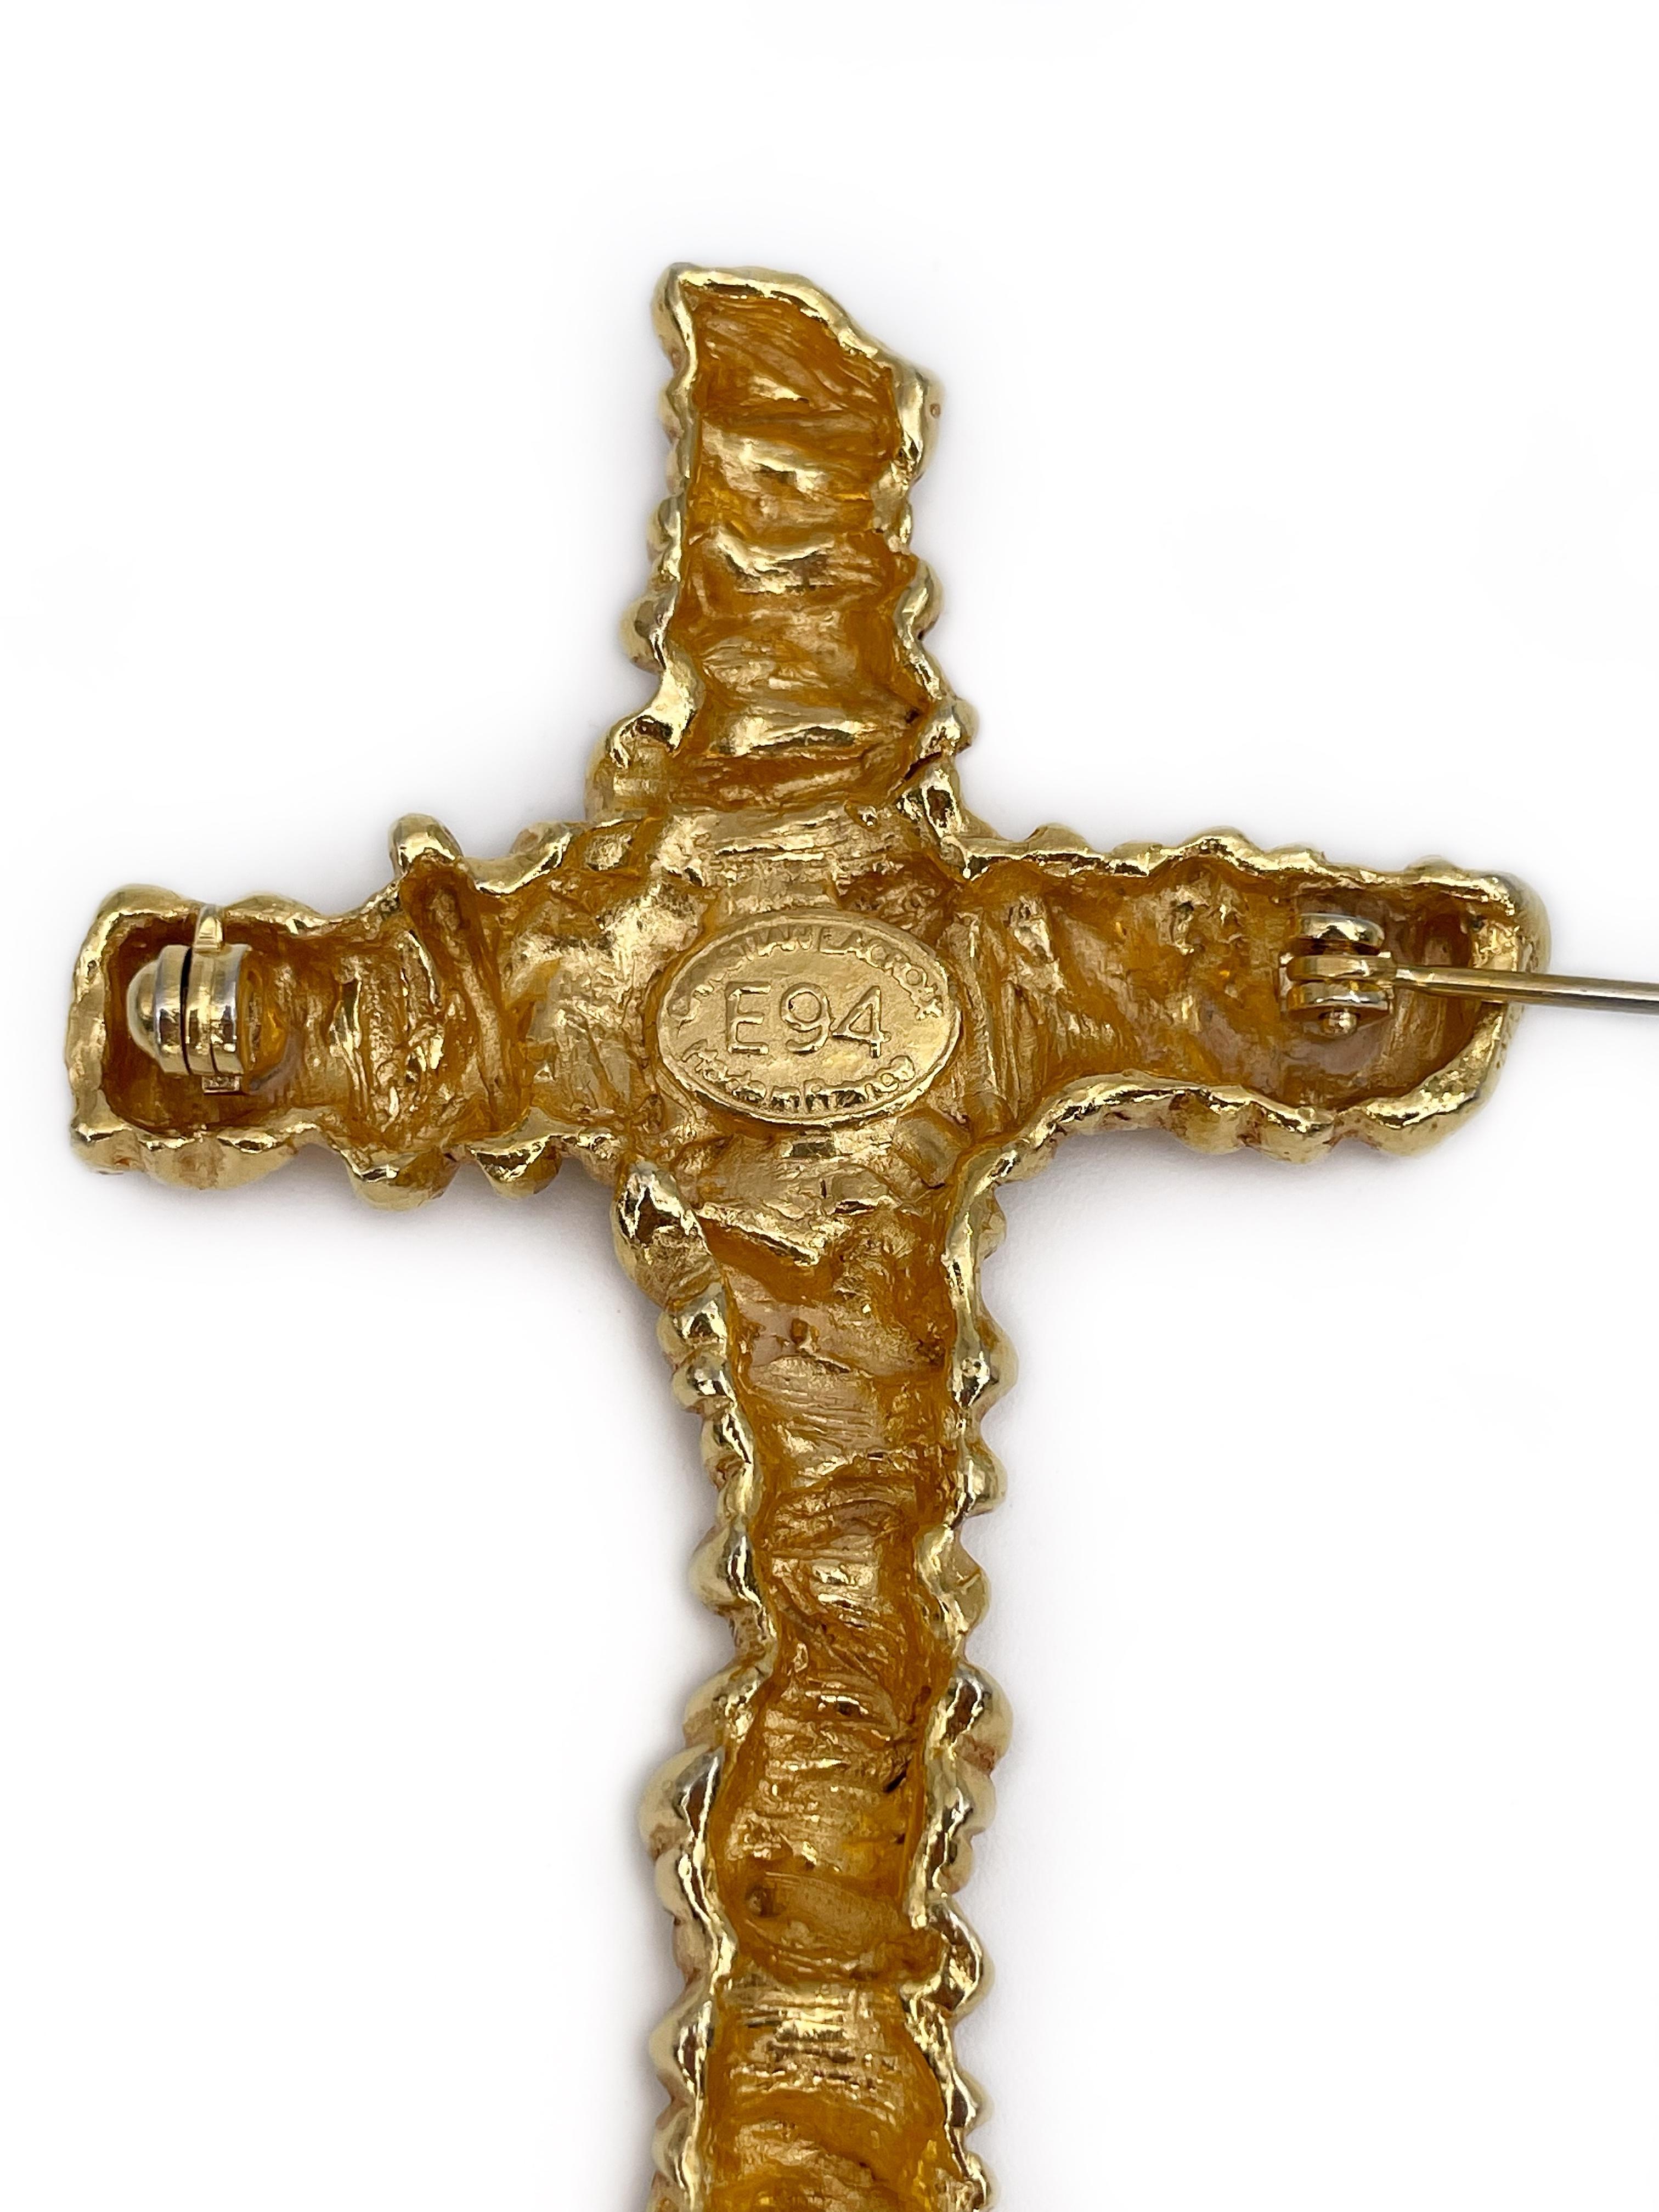 1994 Vintage Christian Lacroix Gold Tone Cross Pin Brooch For Sale 1